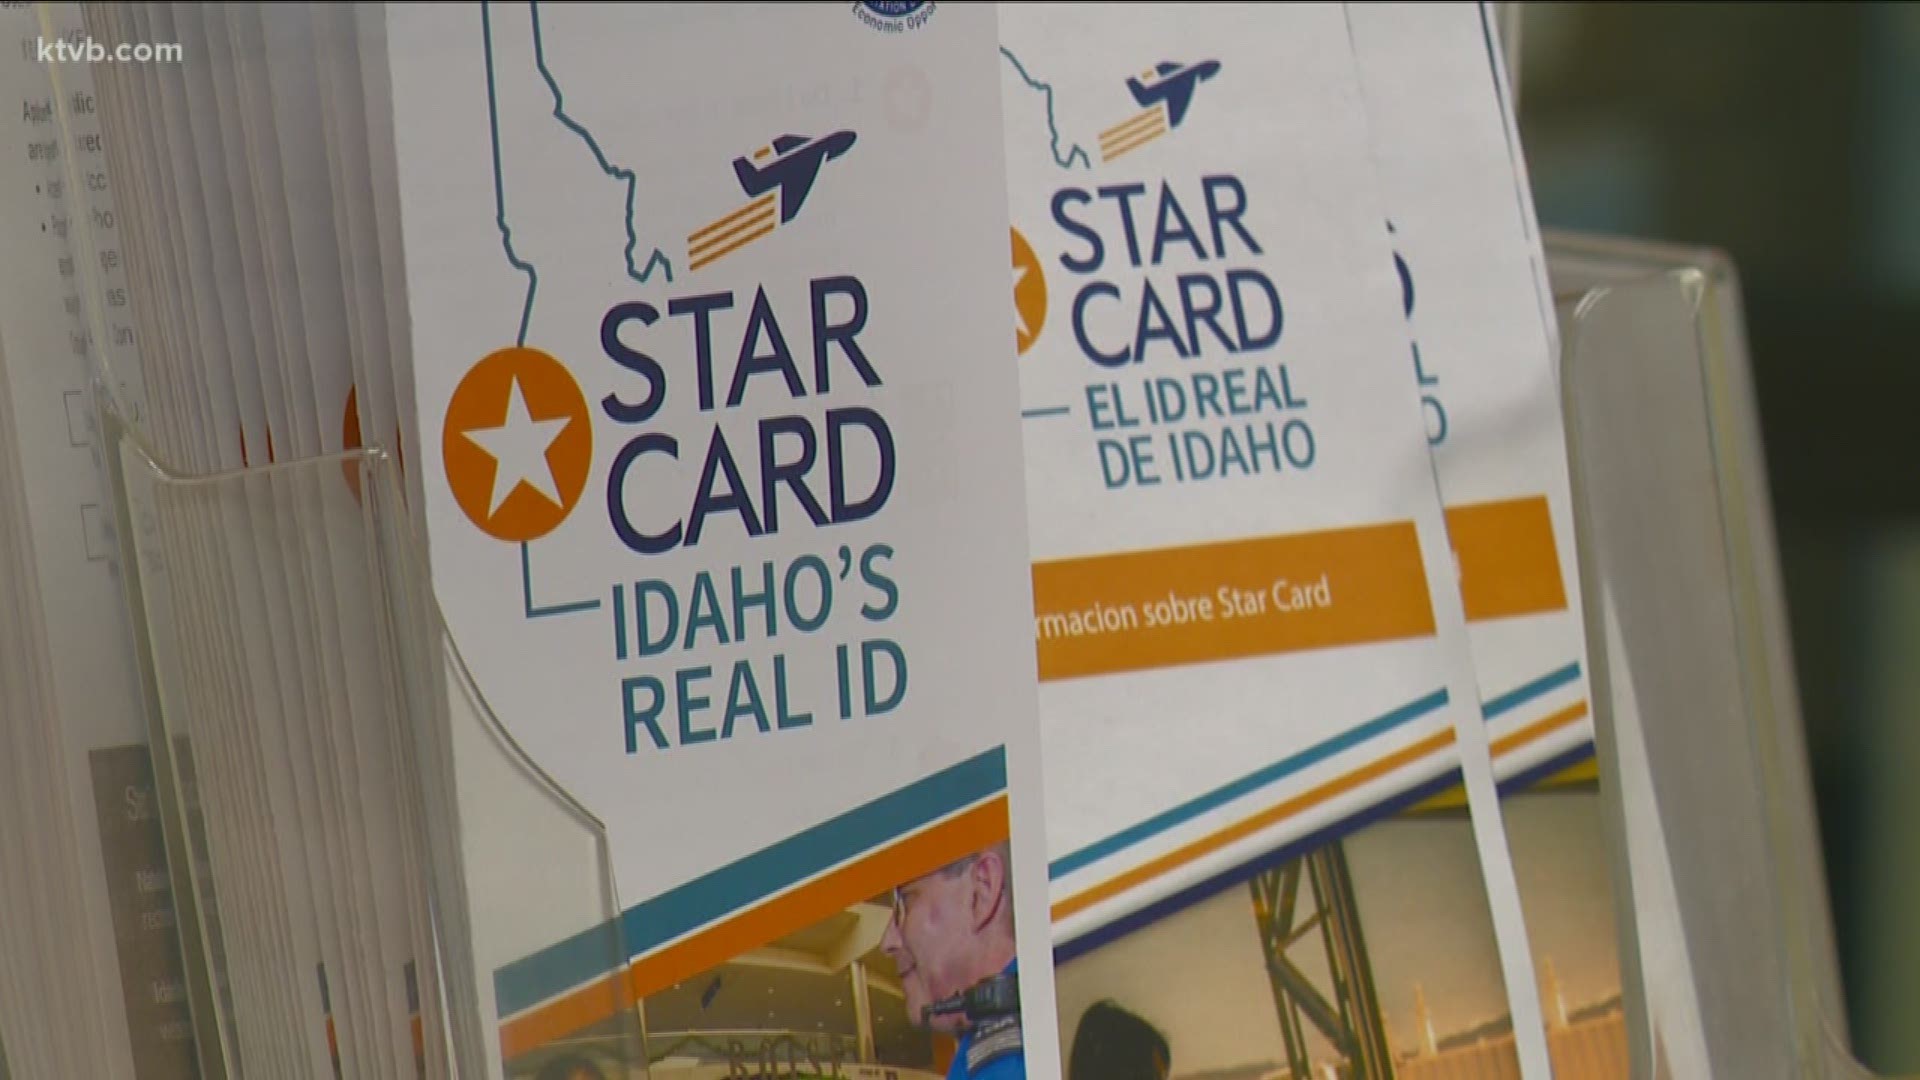 star card travel requirements